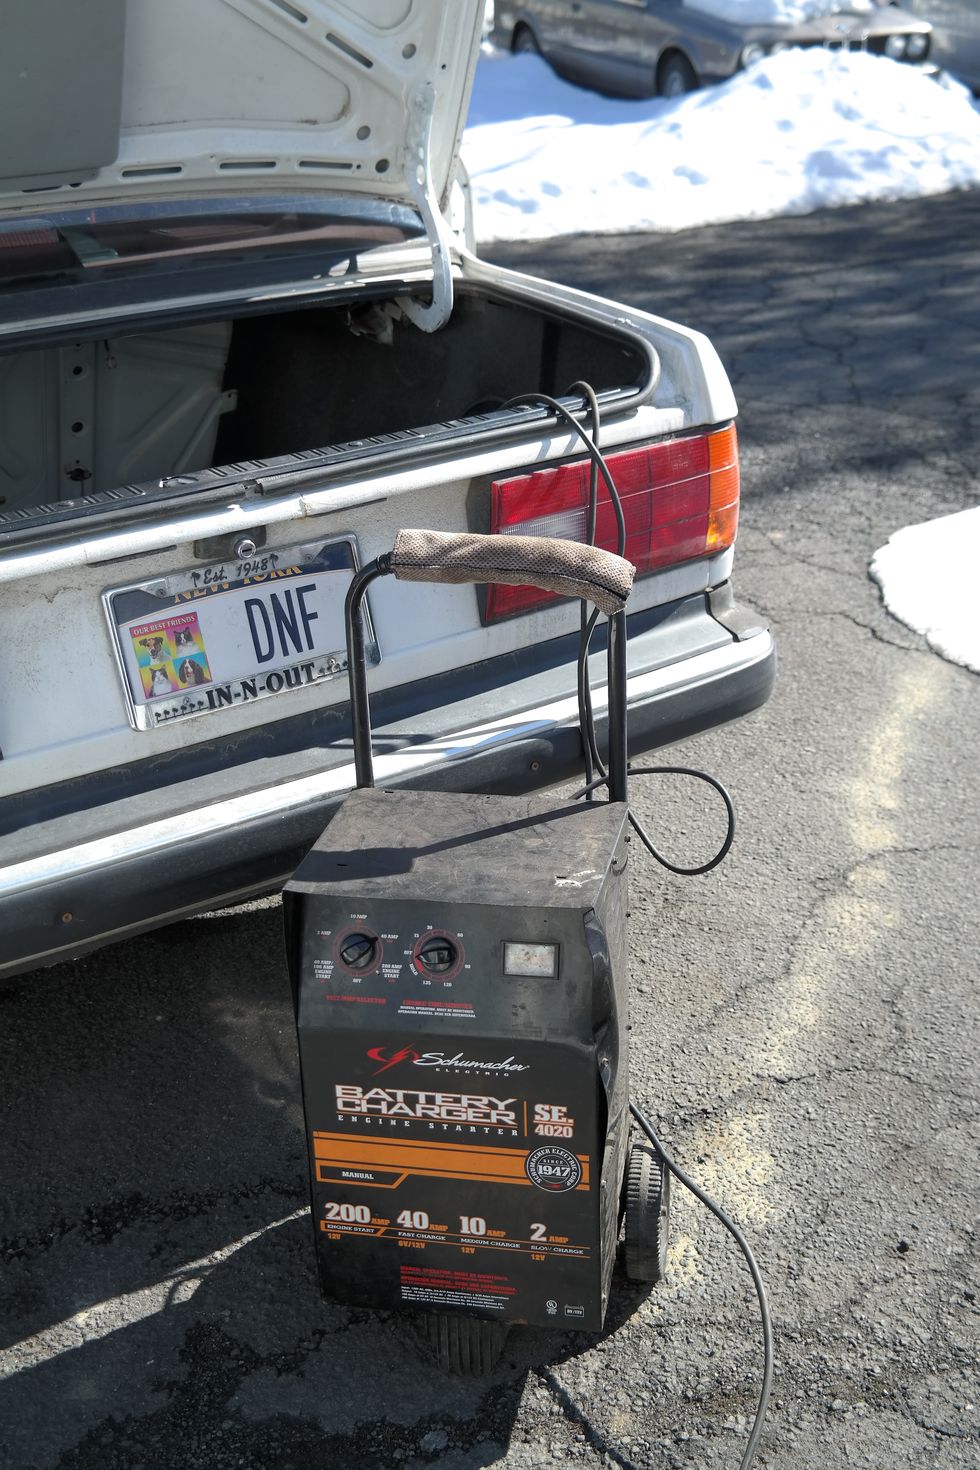 How to Jump Start a Car — And What to Do In a Car Emergency